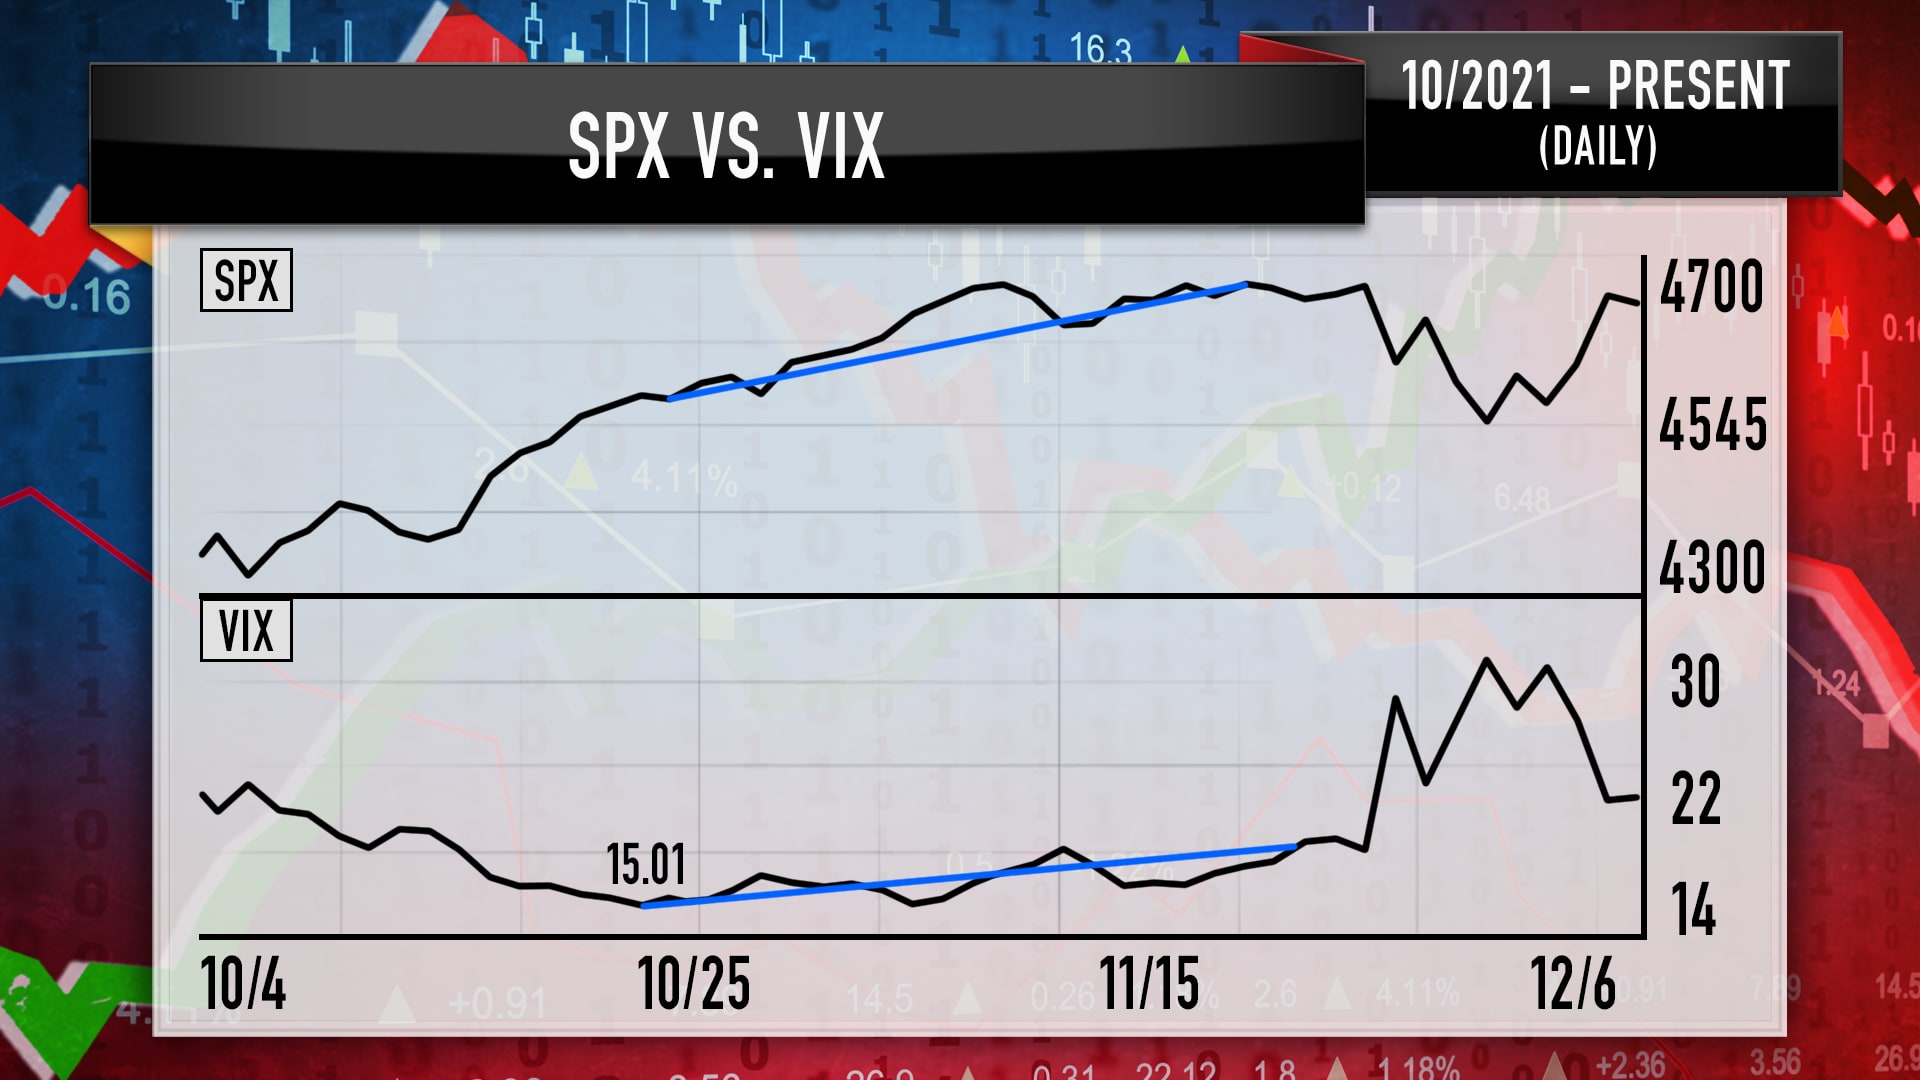 A chart showing the S&P 500 (top) and VIX (bottom) from October to early December.